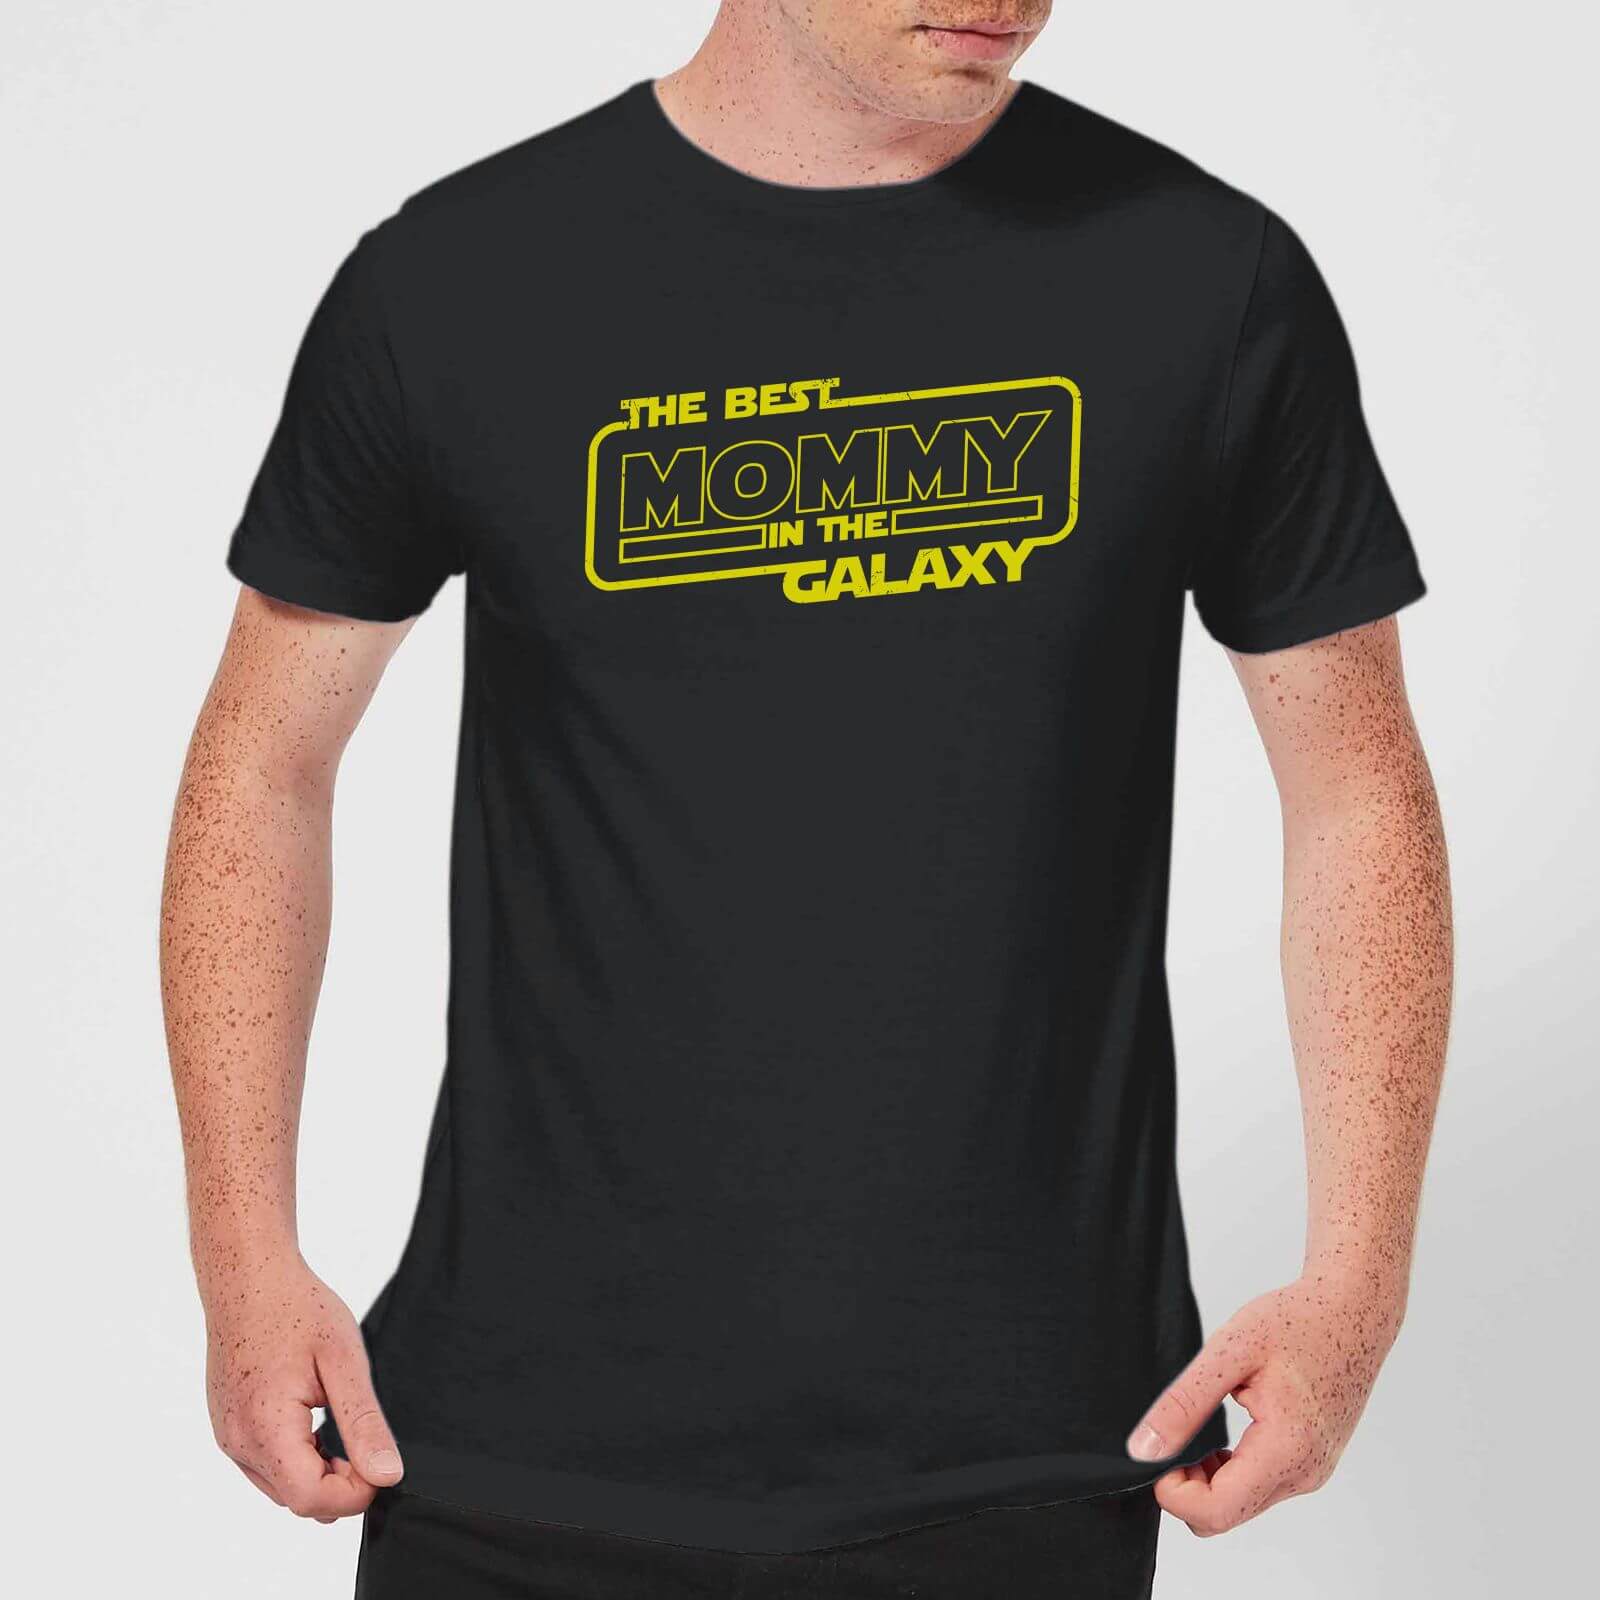 Best Mommy In The Galaxy T-Shirt - Black - S - Black